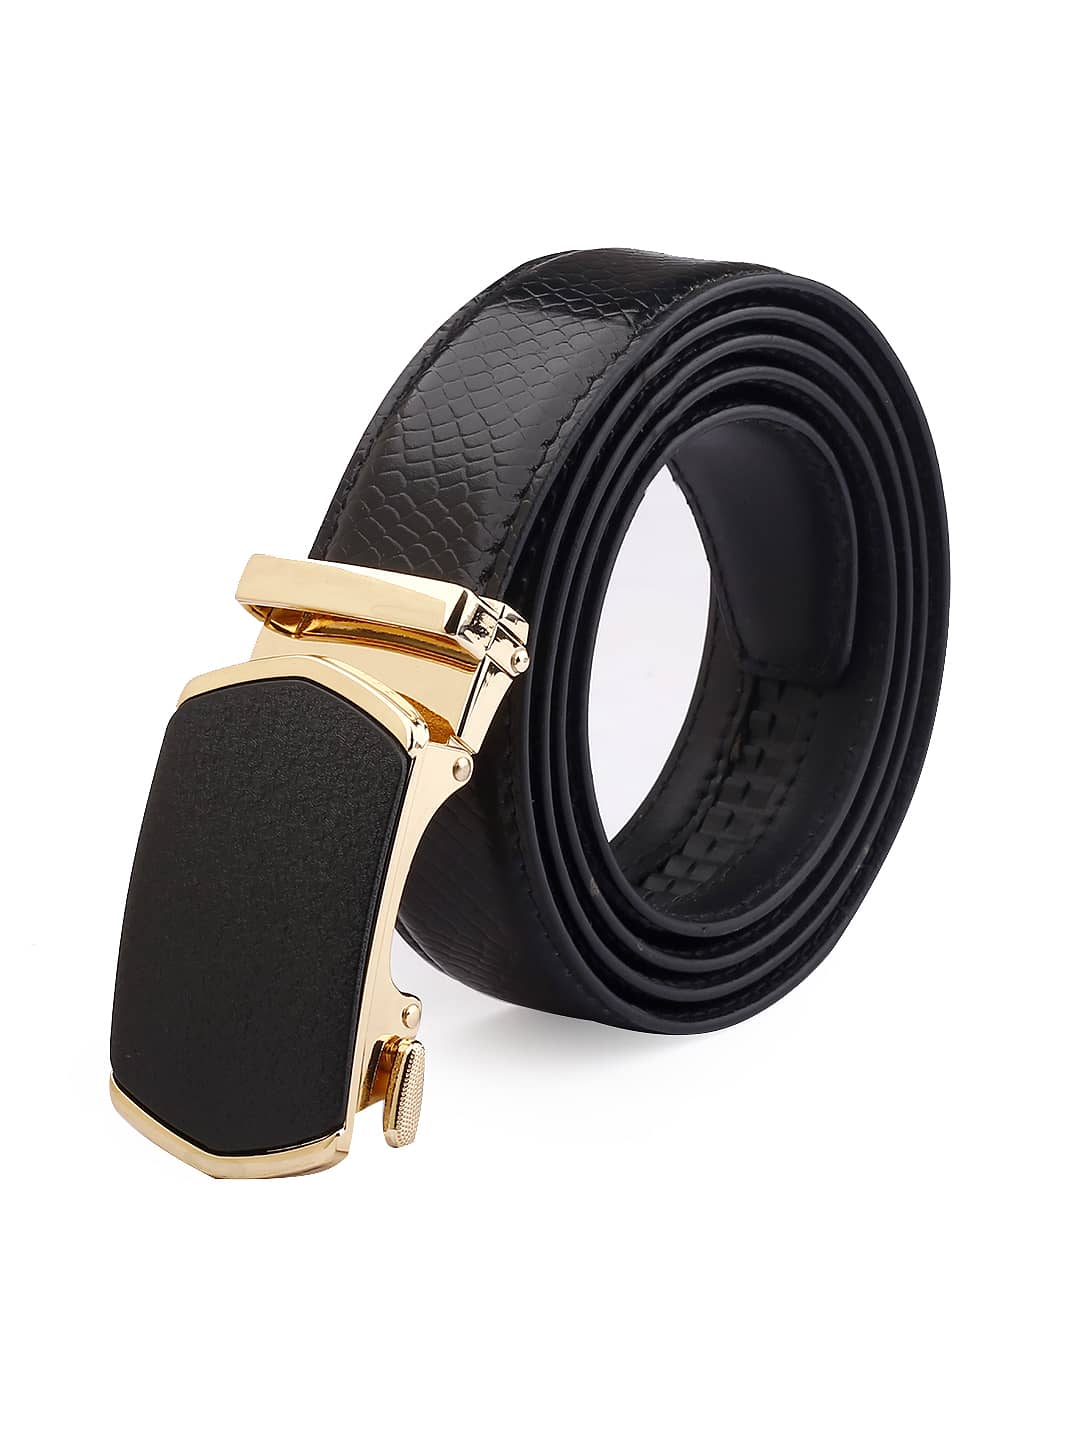 Buy Contacts Men's Genuine Leather Pin Buckle Belt  Leather Belt for Men  Classic Designs for Work & Business Casual (Black) at